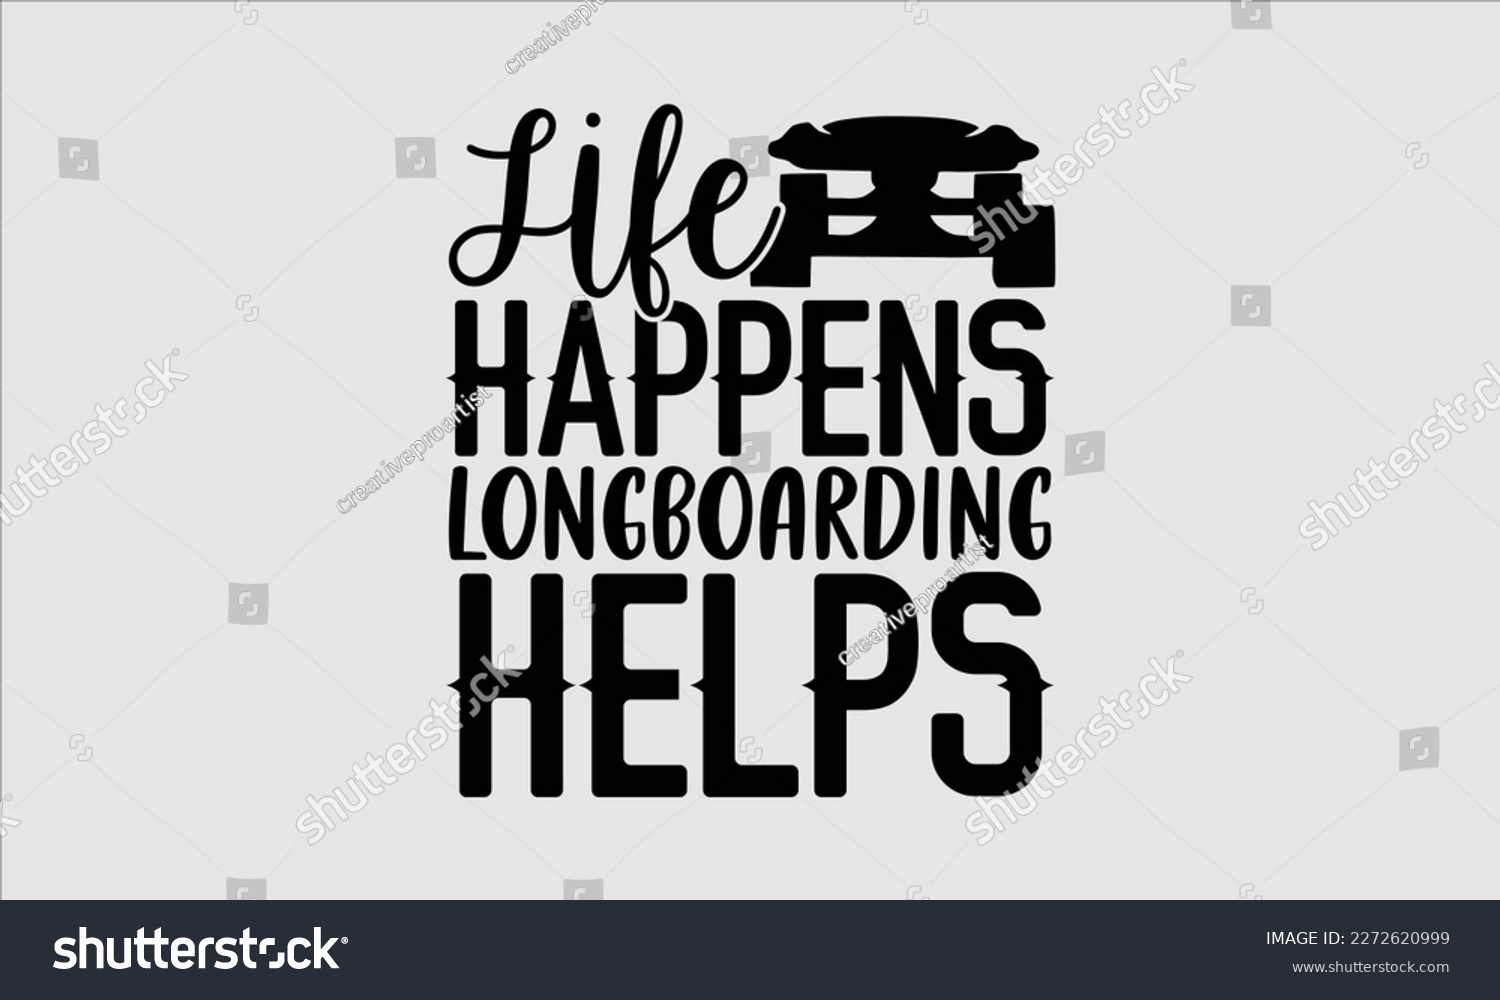 SVG of Life happens longboarding helps- Longboarding T- shirt Design, Hand drawn lettering phrase, Illustration for prints on t-shirts and bags, posters, funny eps files, svg cricut svg